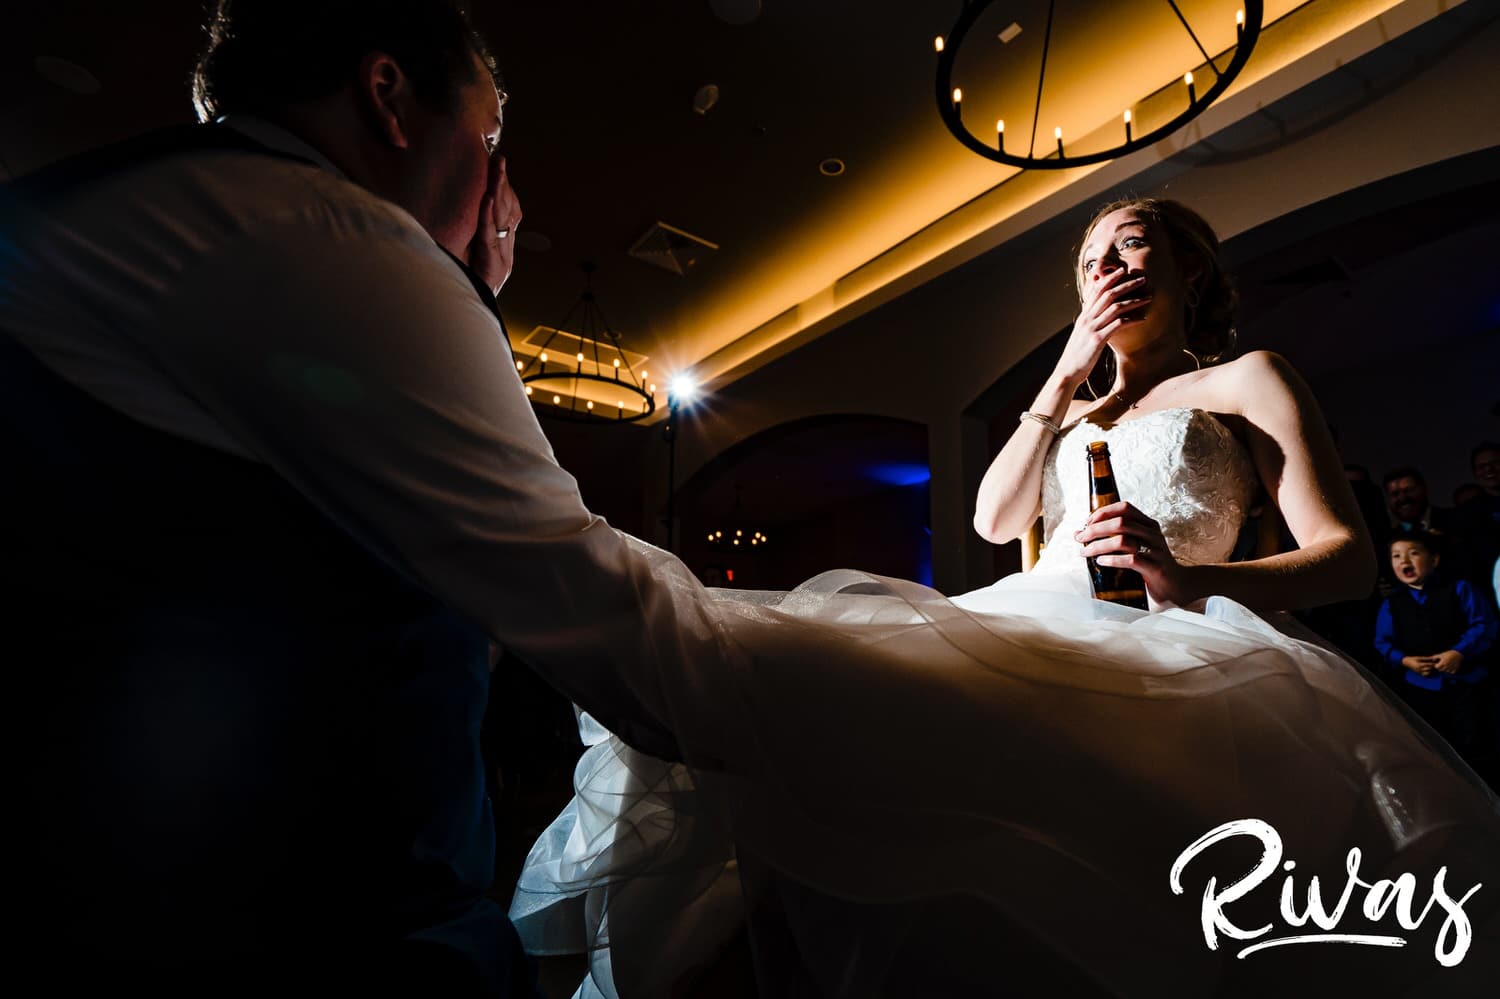 A candid picture taken from behind the groom of his bride, with her hand raised to her mouth in shock as he takes her garter off during their fall wedding reception at Piazza Messina. 